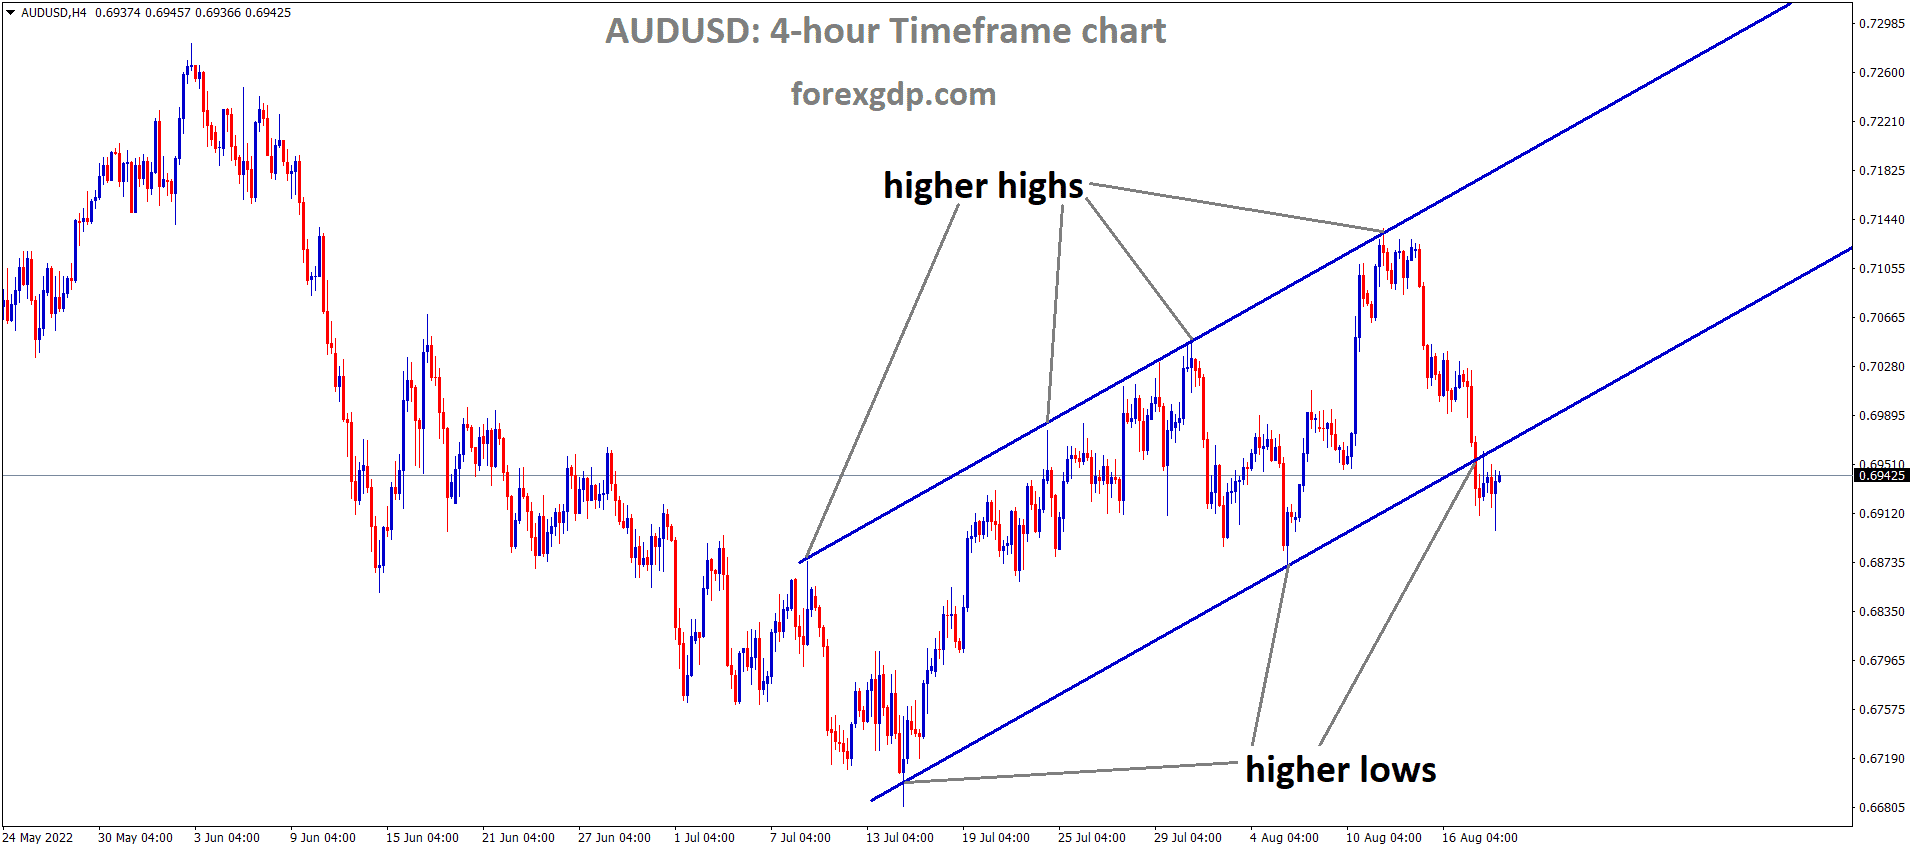 AUDUSD is moving in an Ascending channel and the Market has reached the higher low area of the channel 2